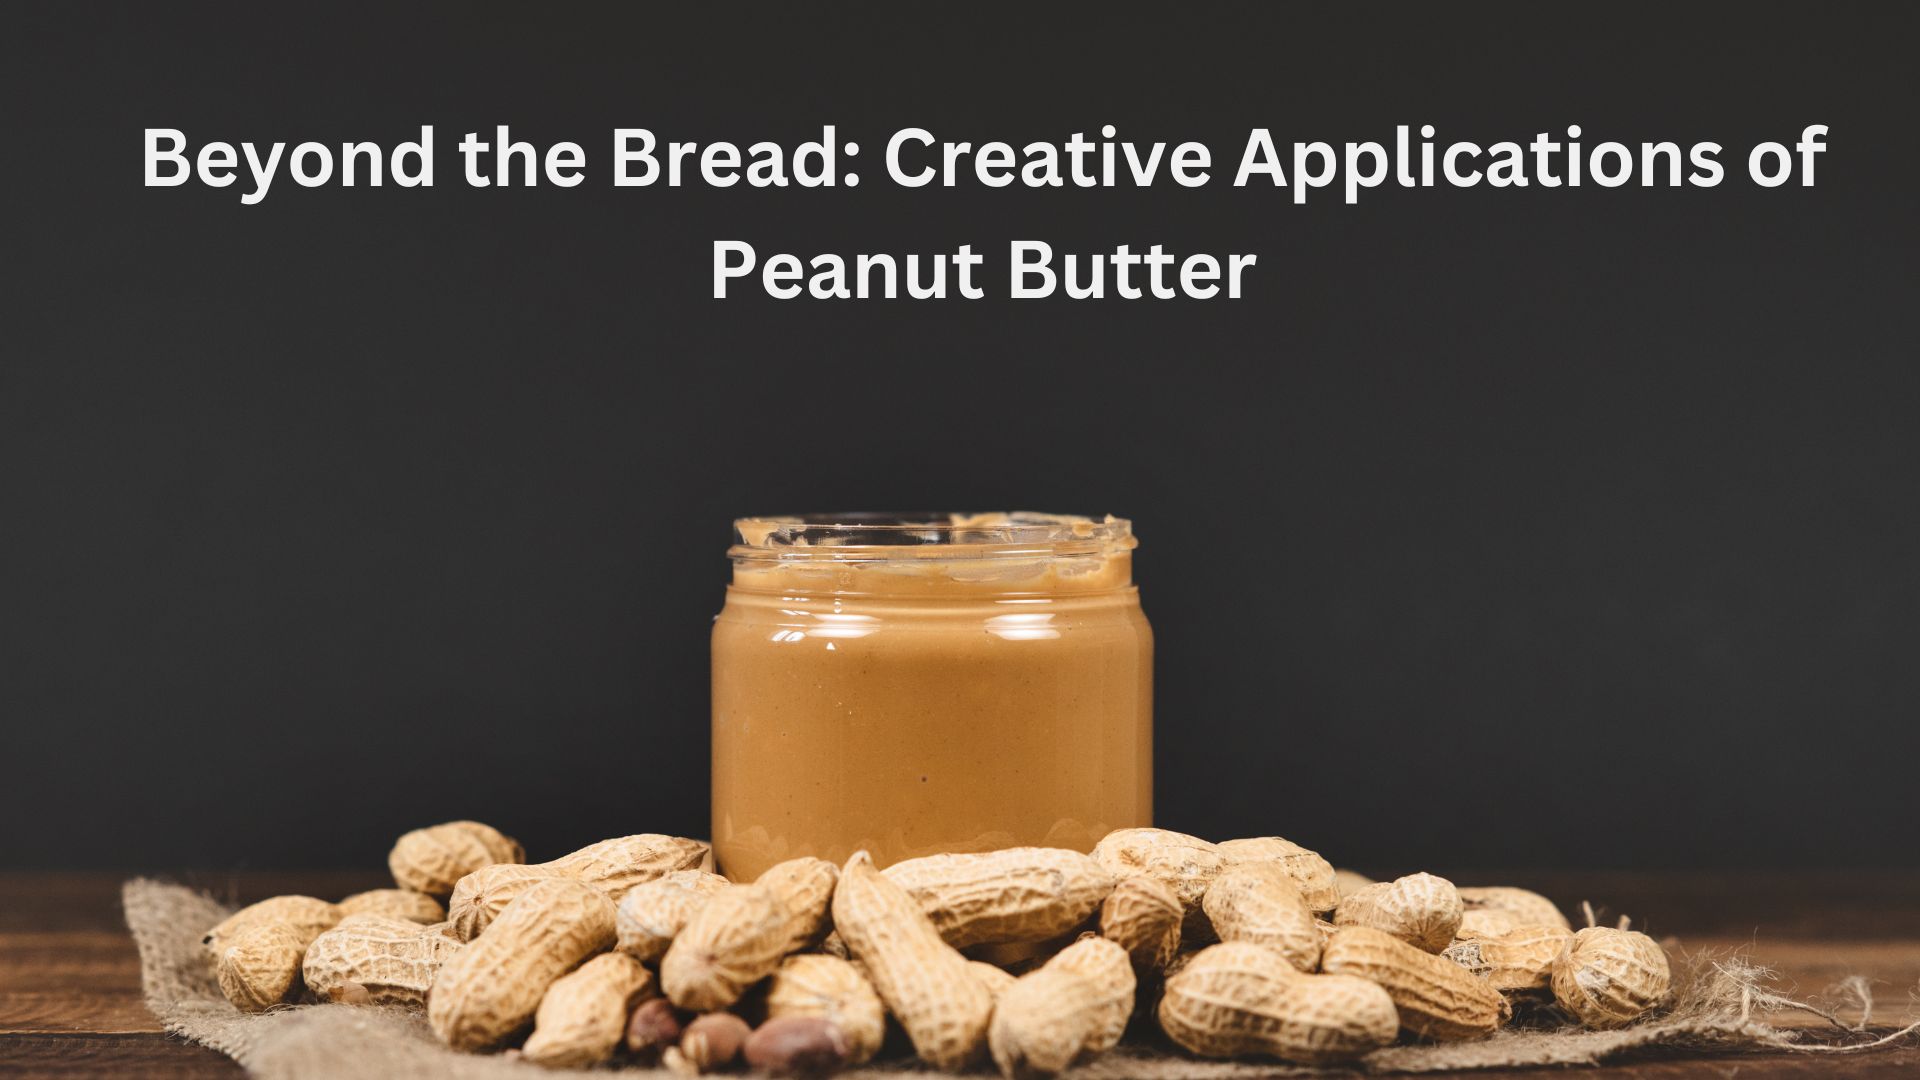 Beyond the Bread: Creative Applications of Peanut Butter